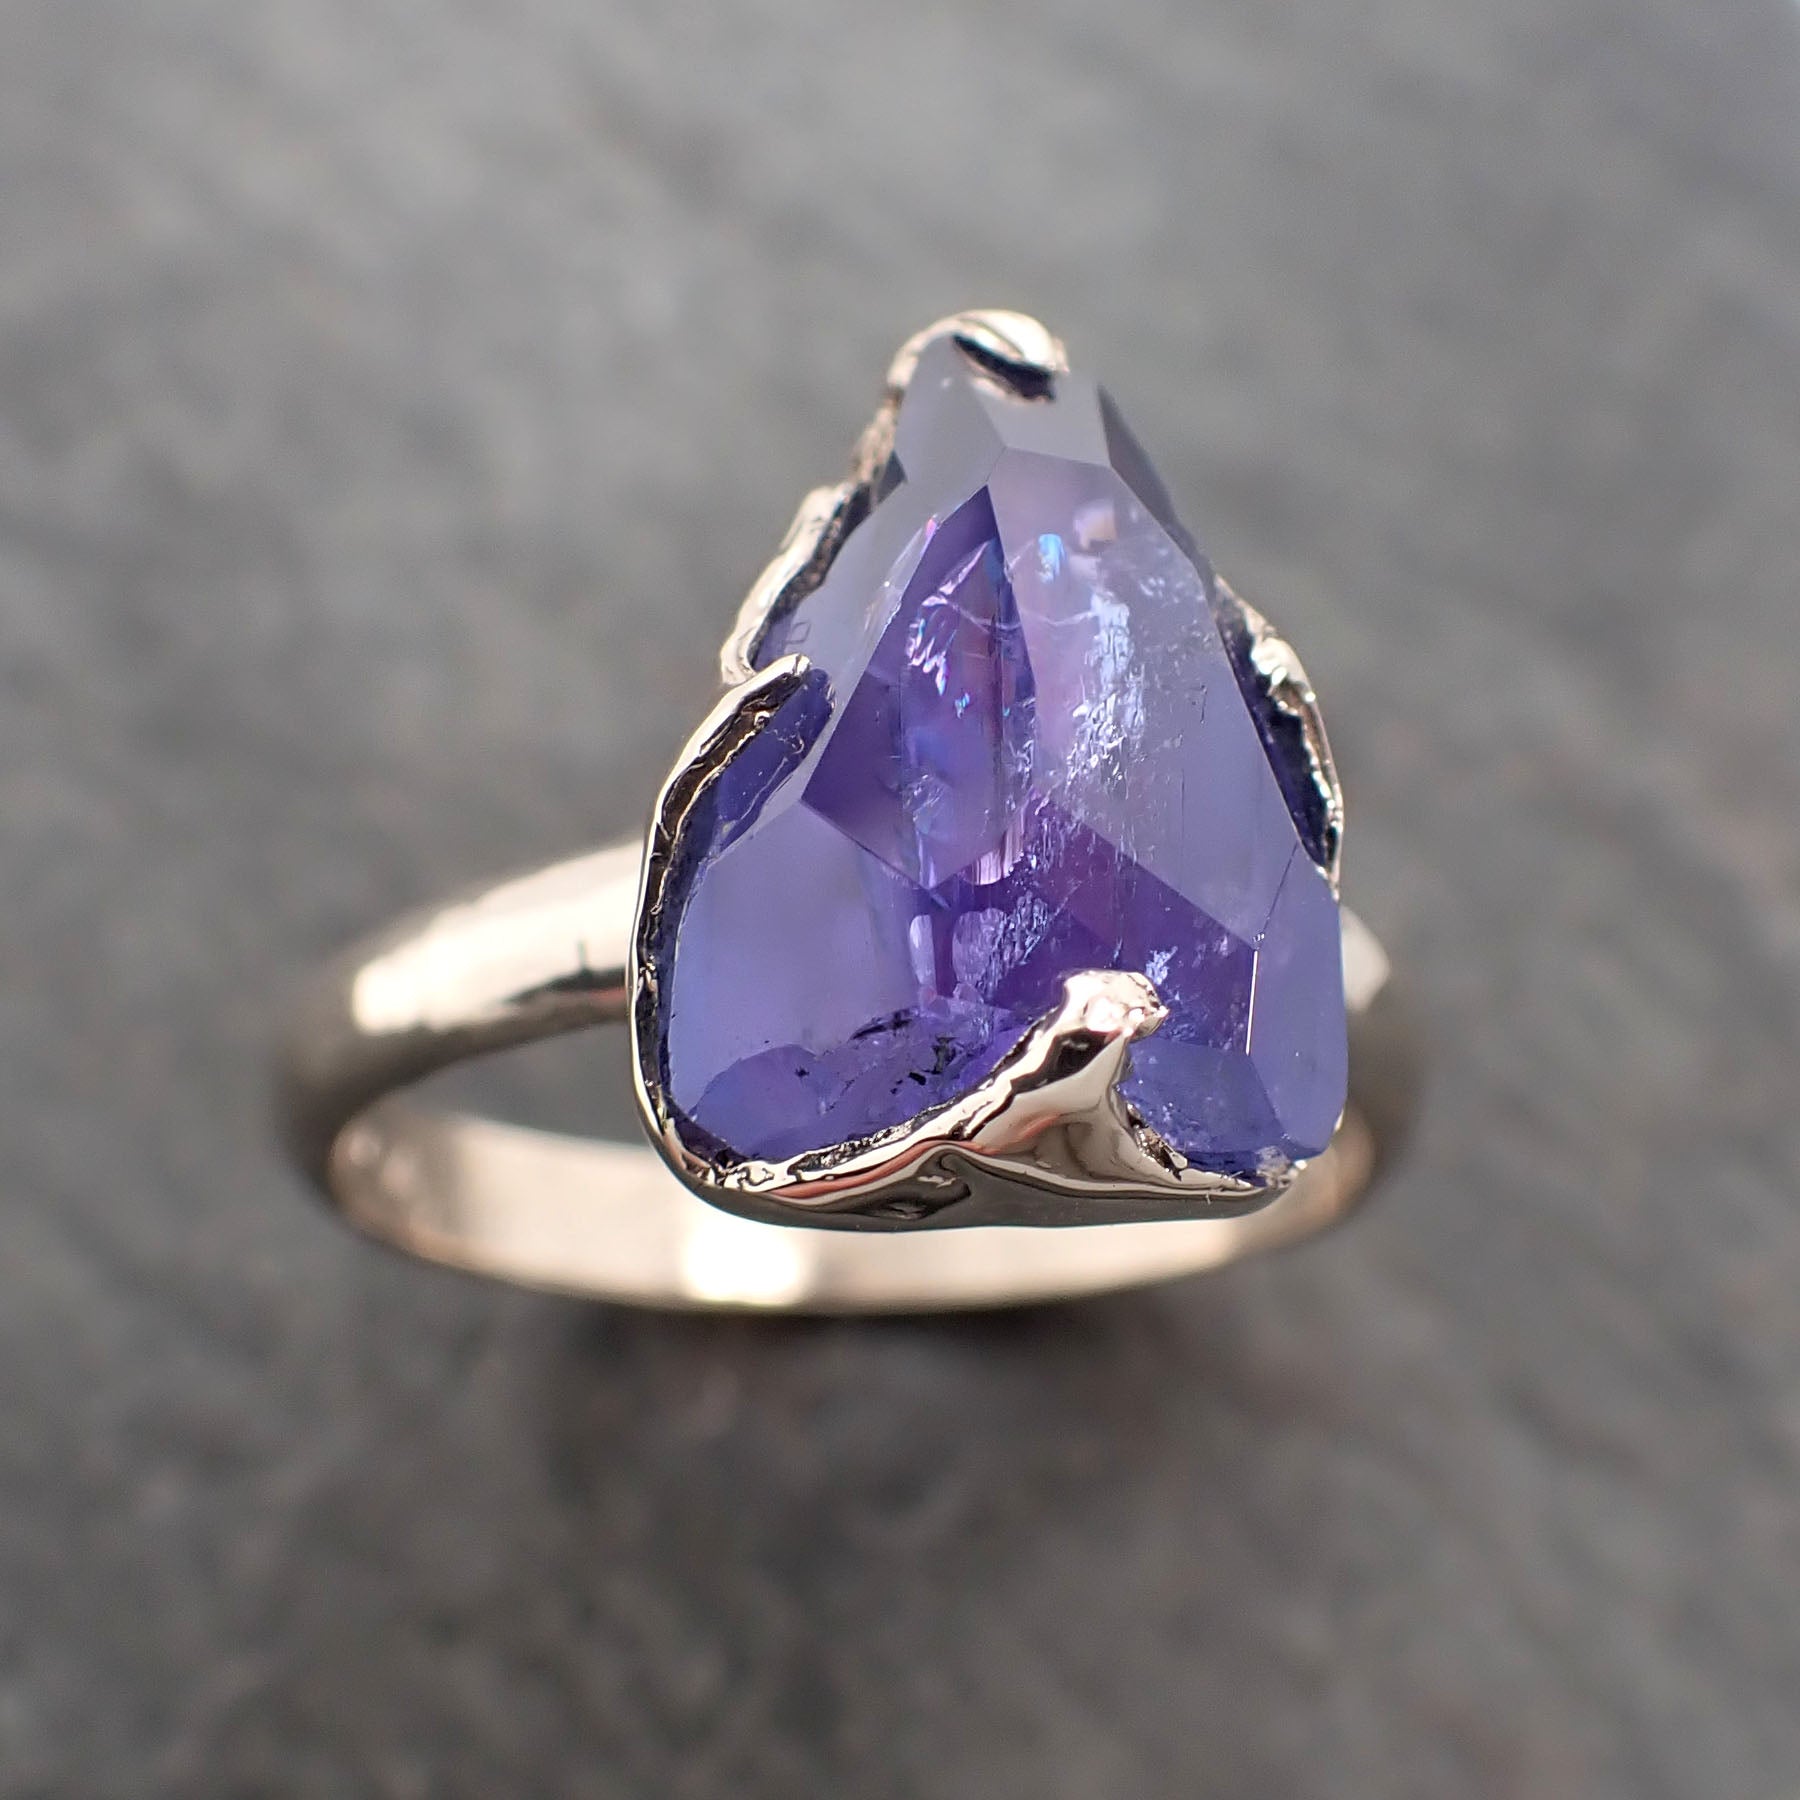 Fancy cut Tanzanite Crystal Solitaire 18k recycled White Gold Ring Gemstone Tanzanite stacking cocktail statement byAngeline 2388